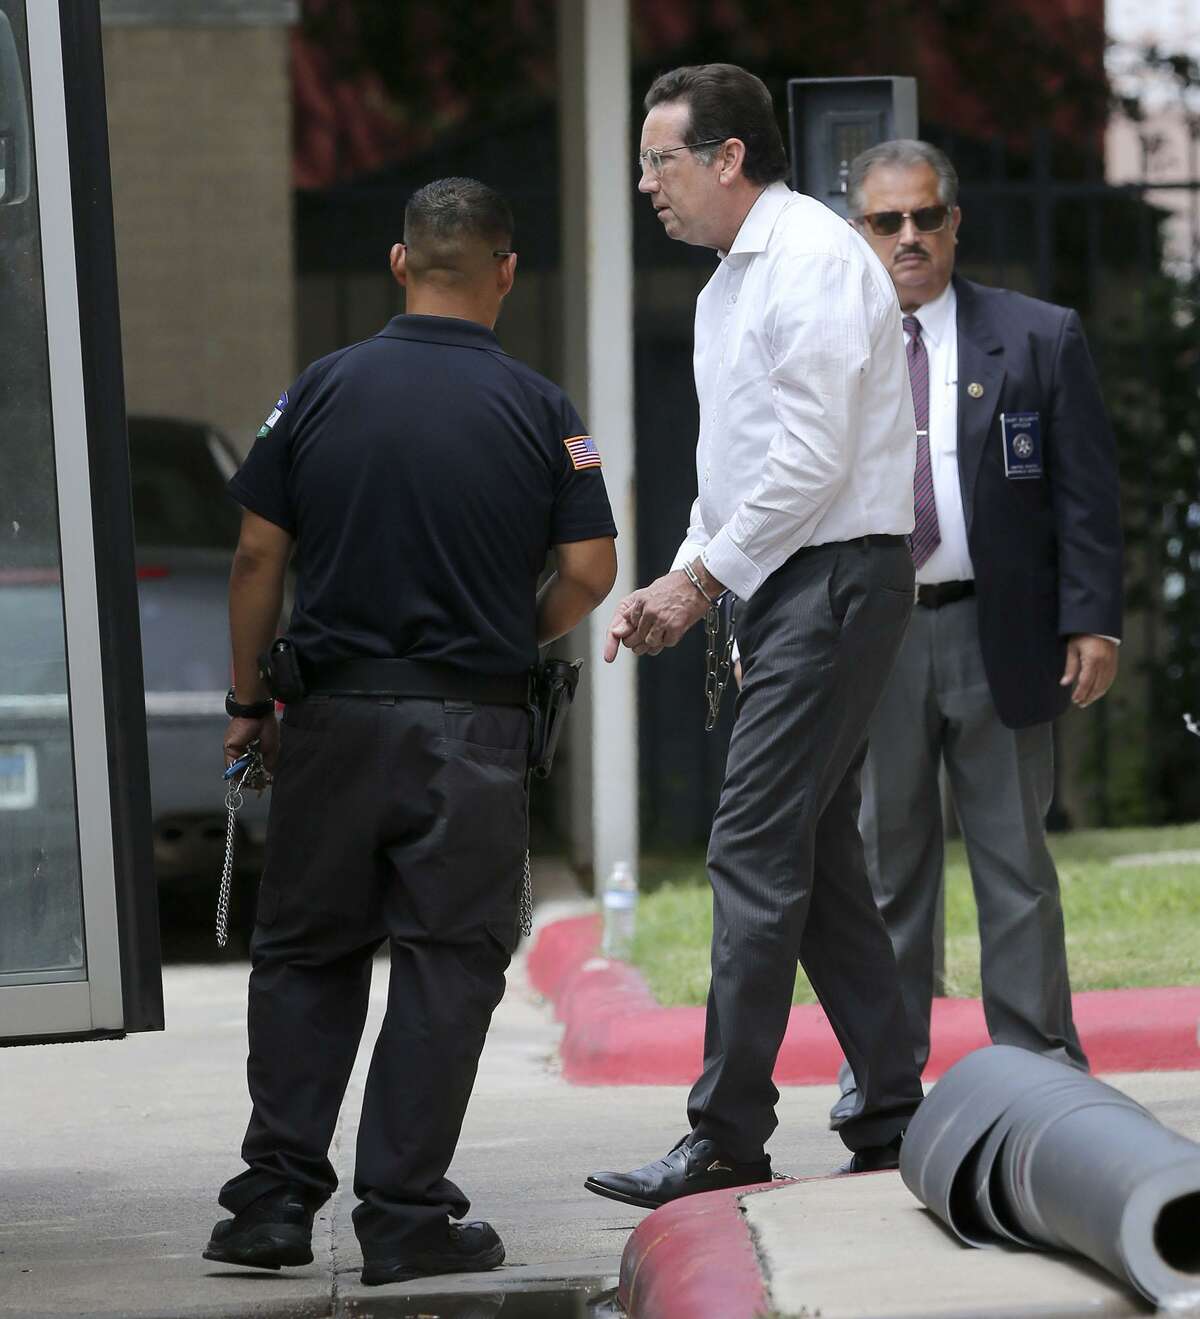 Former Crystal City Manager James Jonas III is remanded into custody after his trial in federal court June 26 in Del Rio. Jonas and Crystal City’s mayor Ricardo Lopez were both found guilty by a jury. Jonas was found guilty on 14 counts including bribery, conspiracy and fraud.